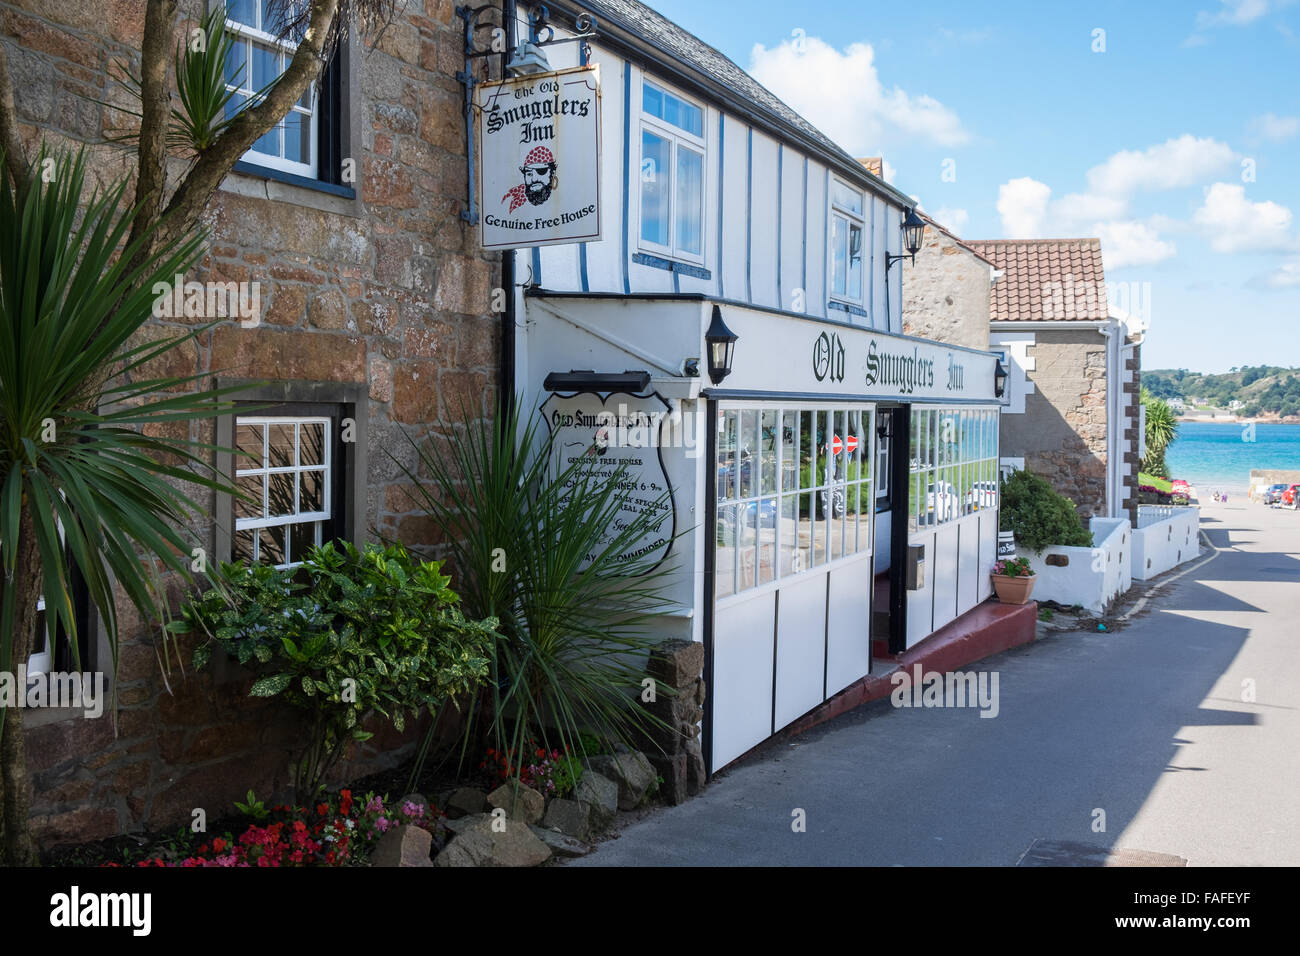 the old smugglers inn jersey